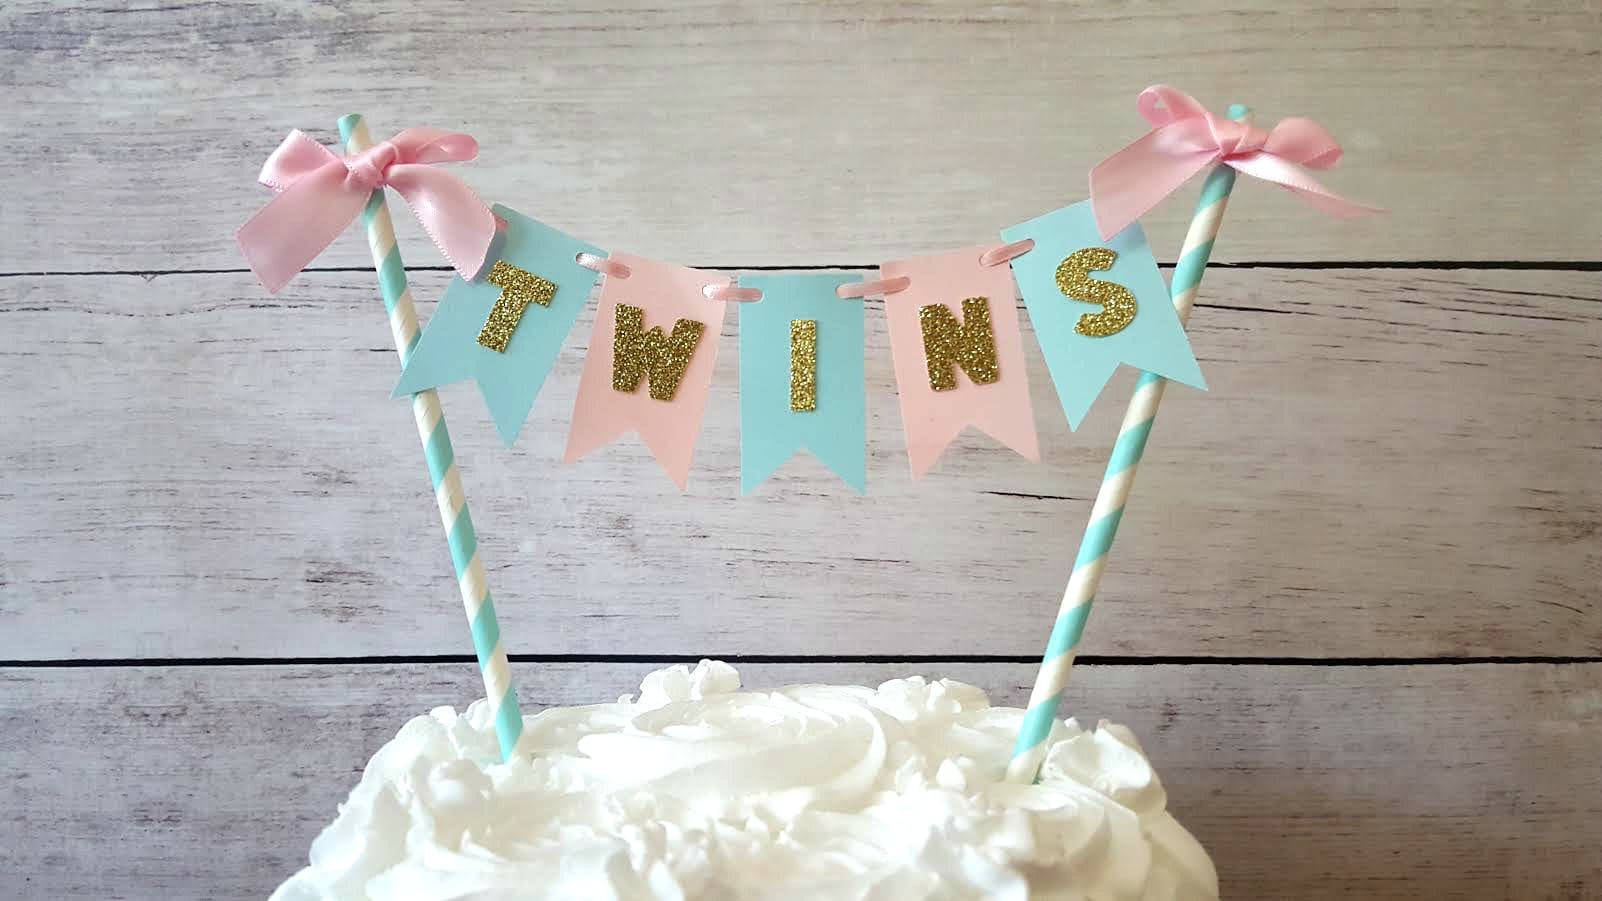 WE ARE TWO  Bunting Party Decorations Girl boy twin Cake Smash Banner pink blue 